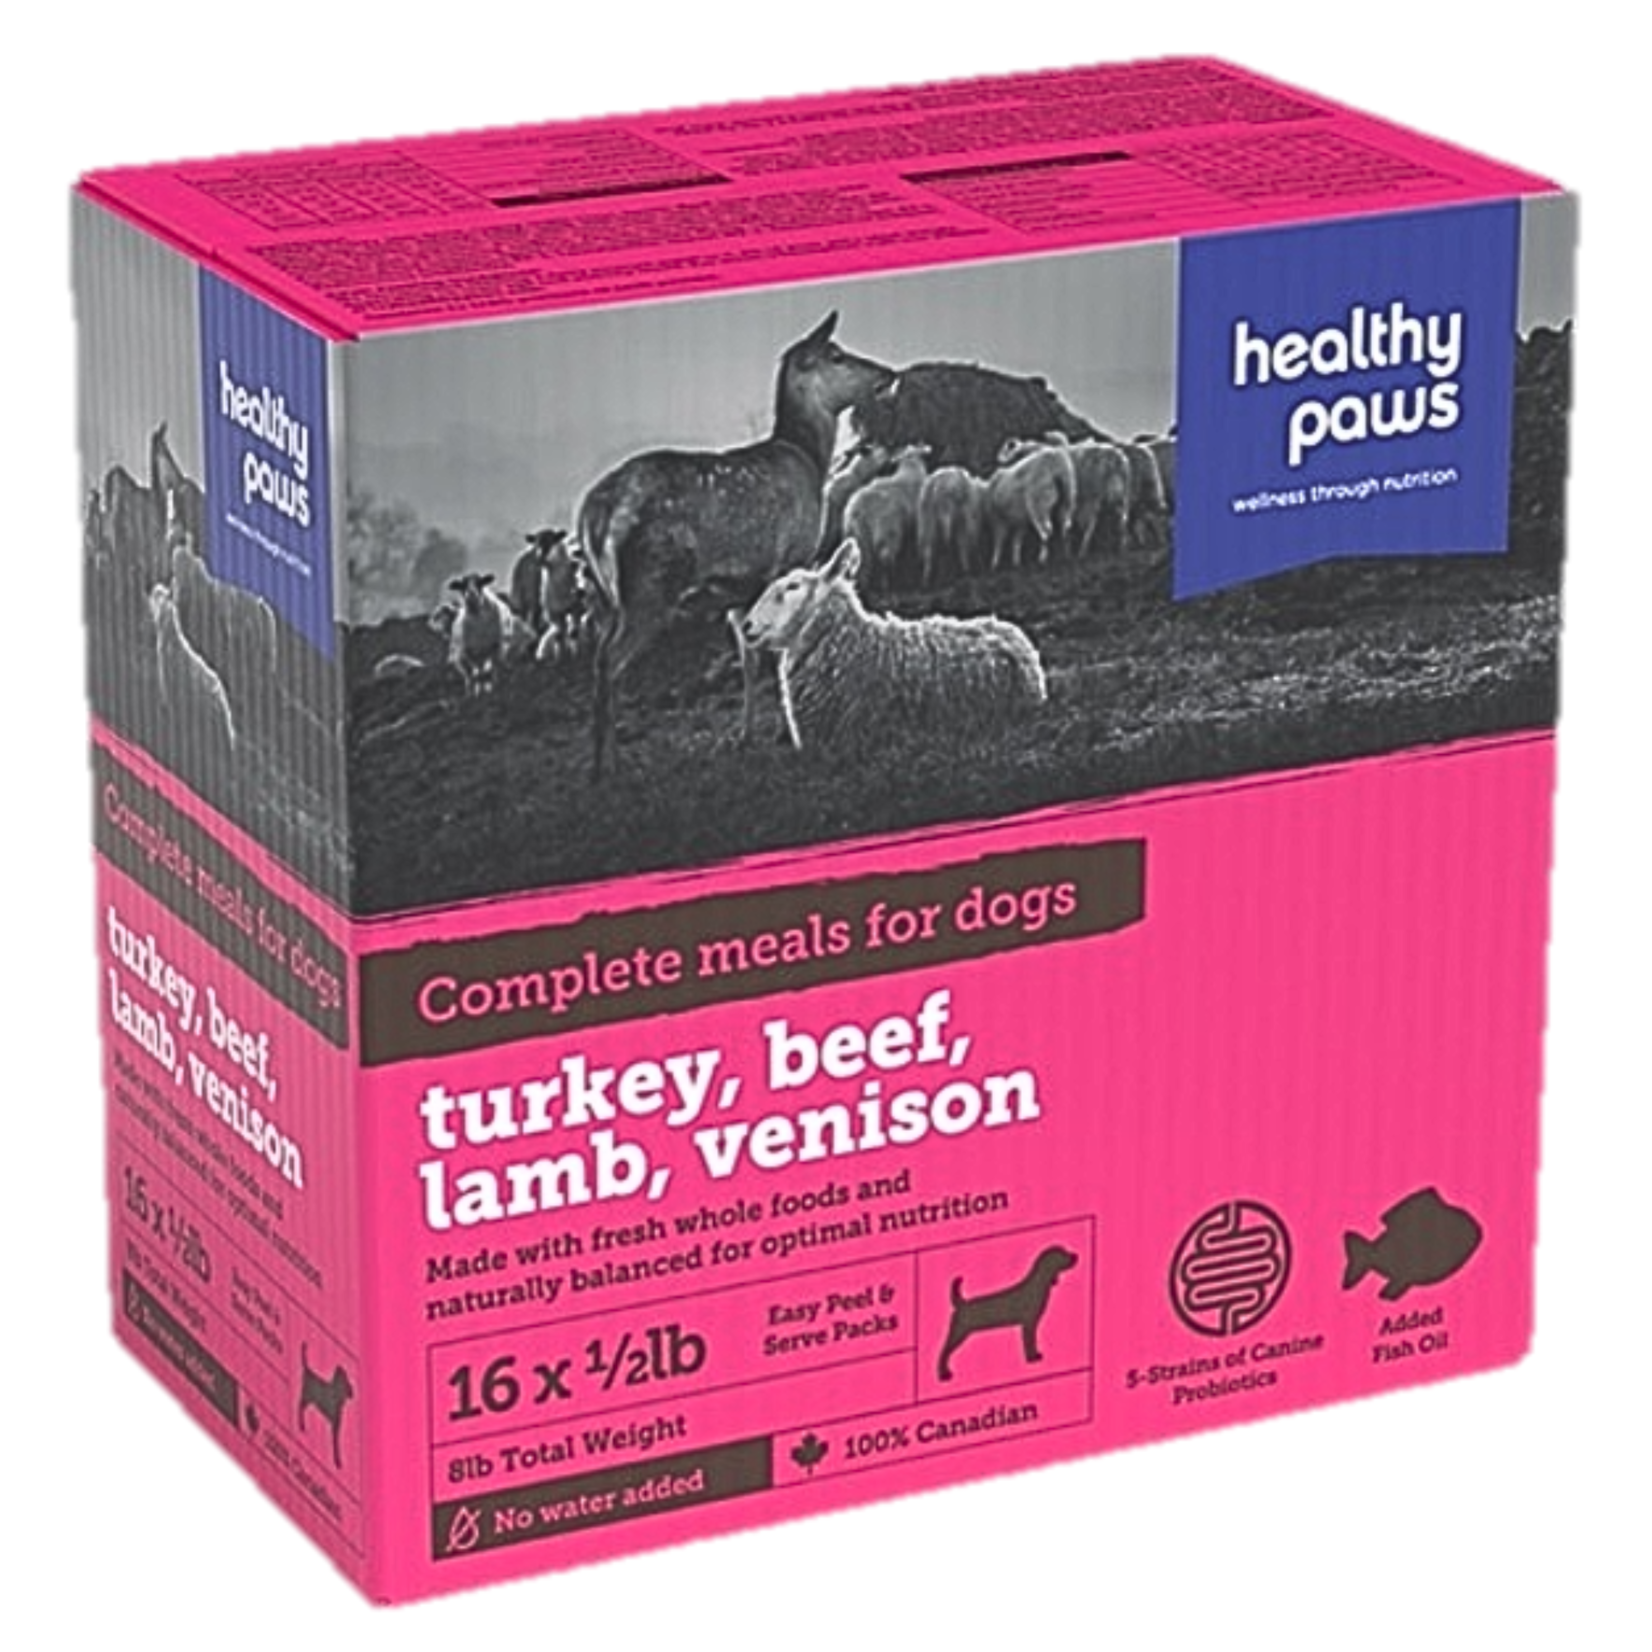 Healthy Paws Healthy Paws: Complete Dinner: Turkey, Beef, Lamb, Venison 8lb